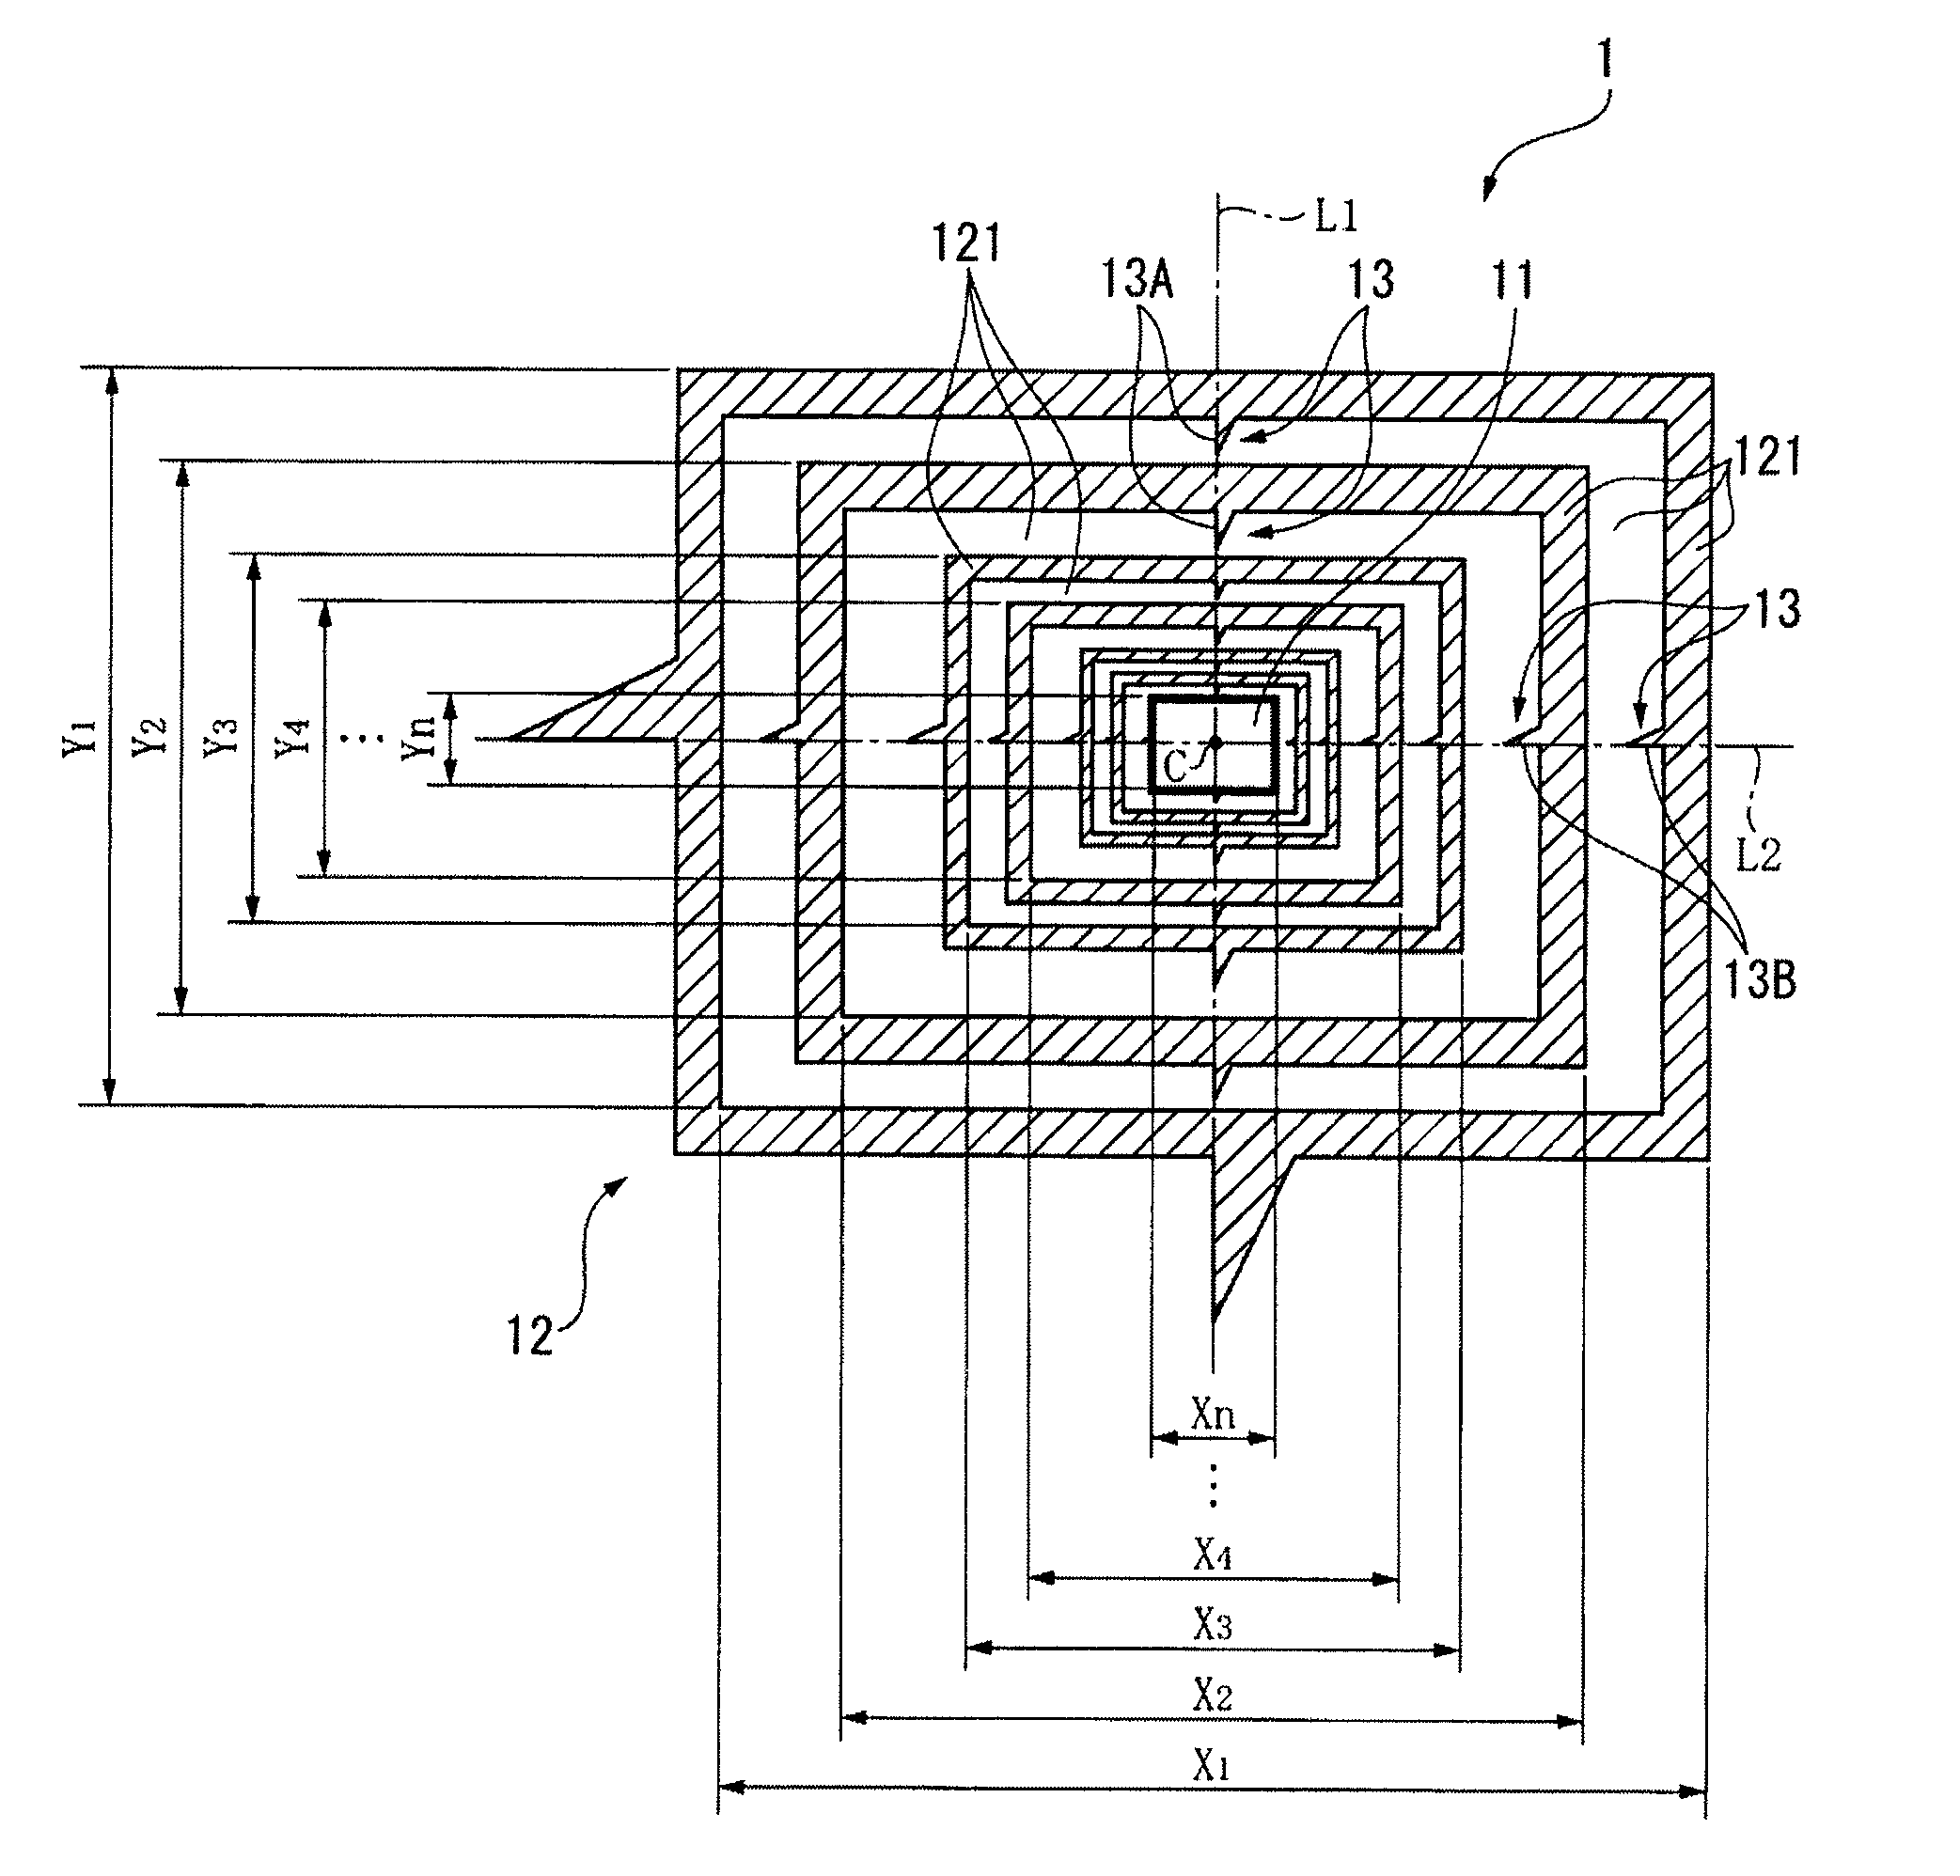 Calibration pattern for imaging device